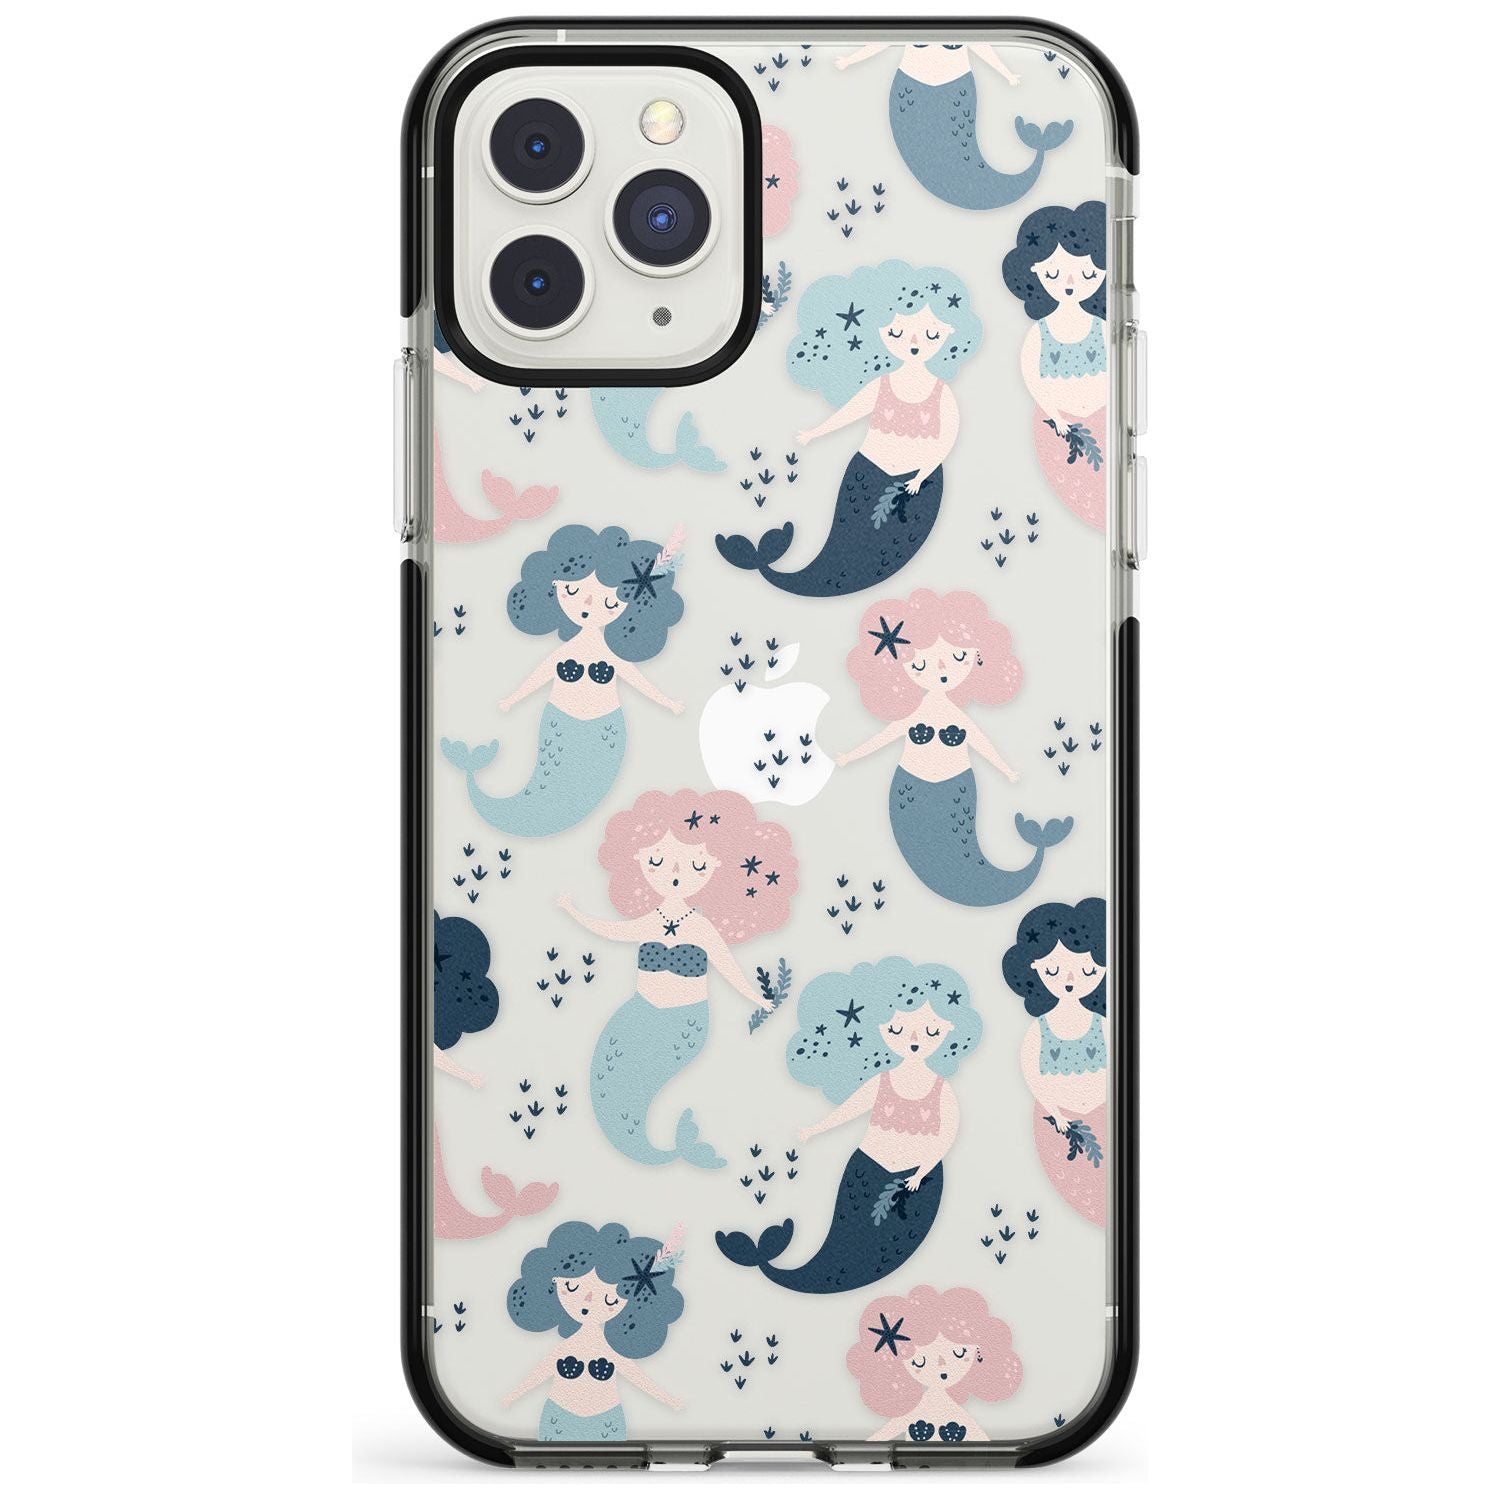 Mermaid Vibes Black Impact Phone Case for iPhone 11 Pro Max